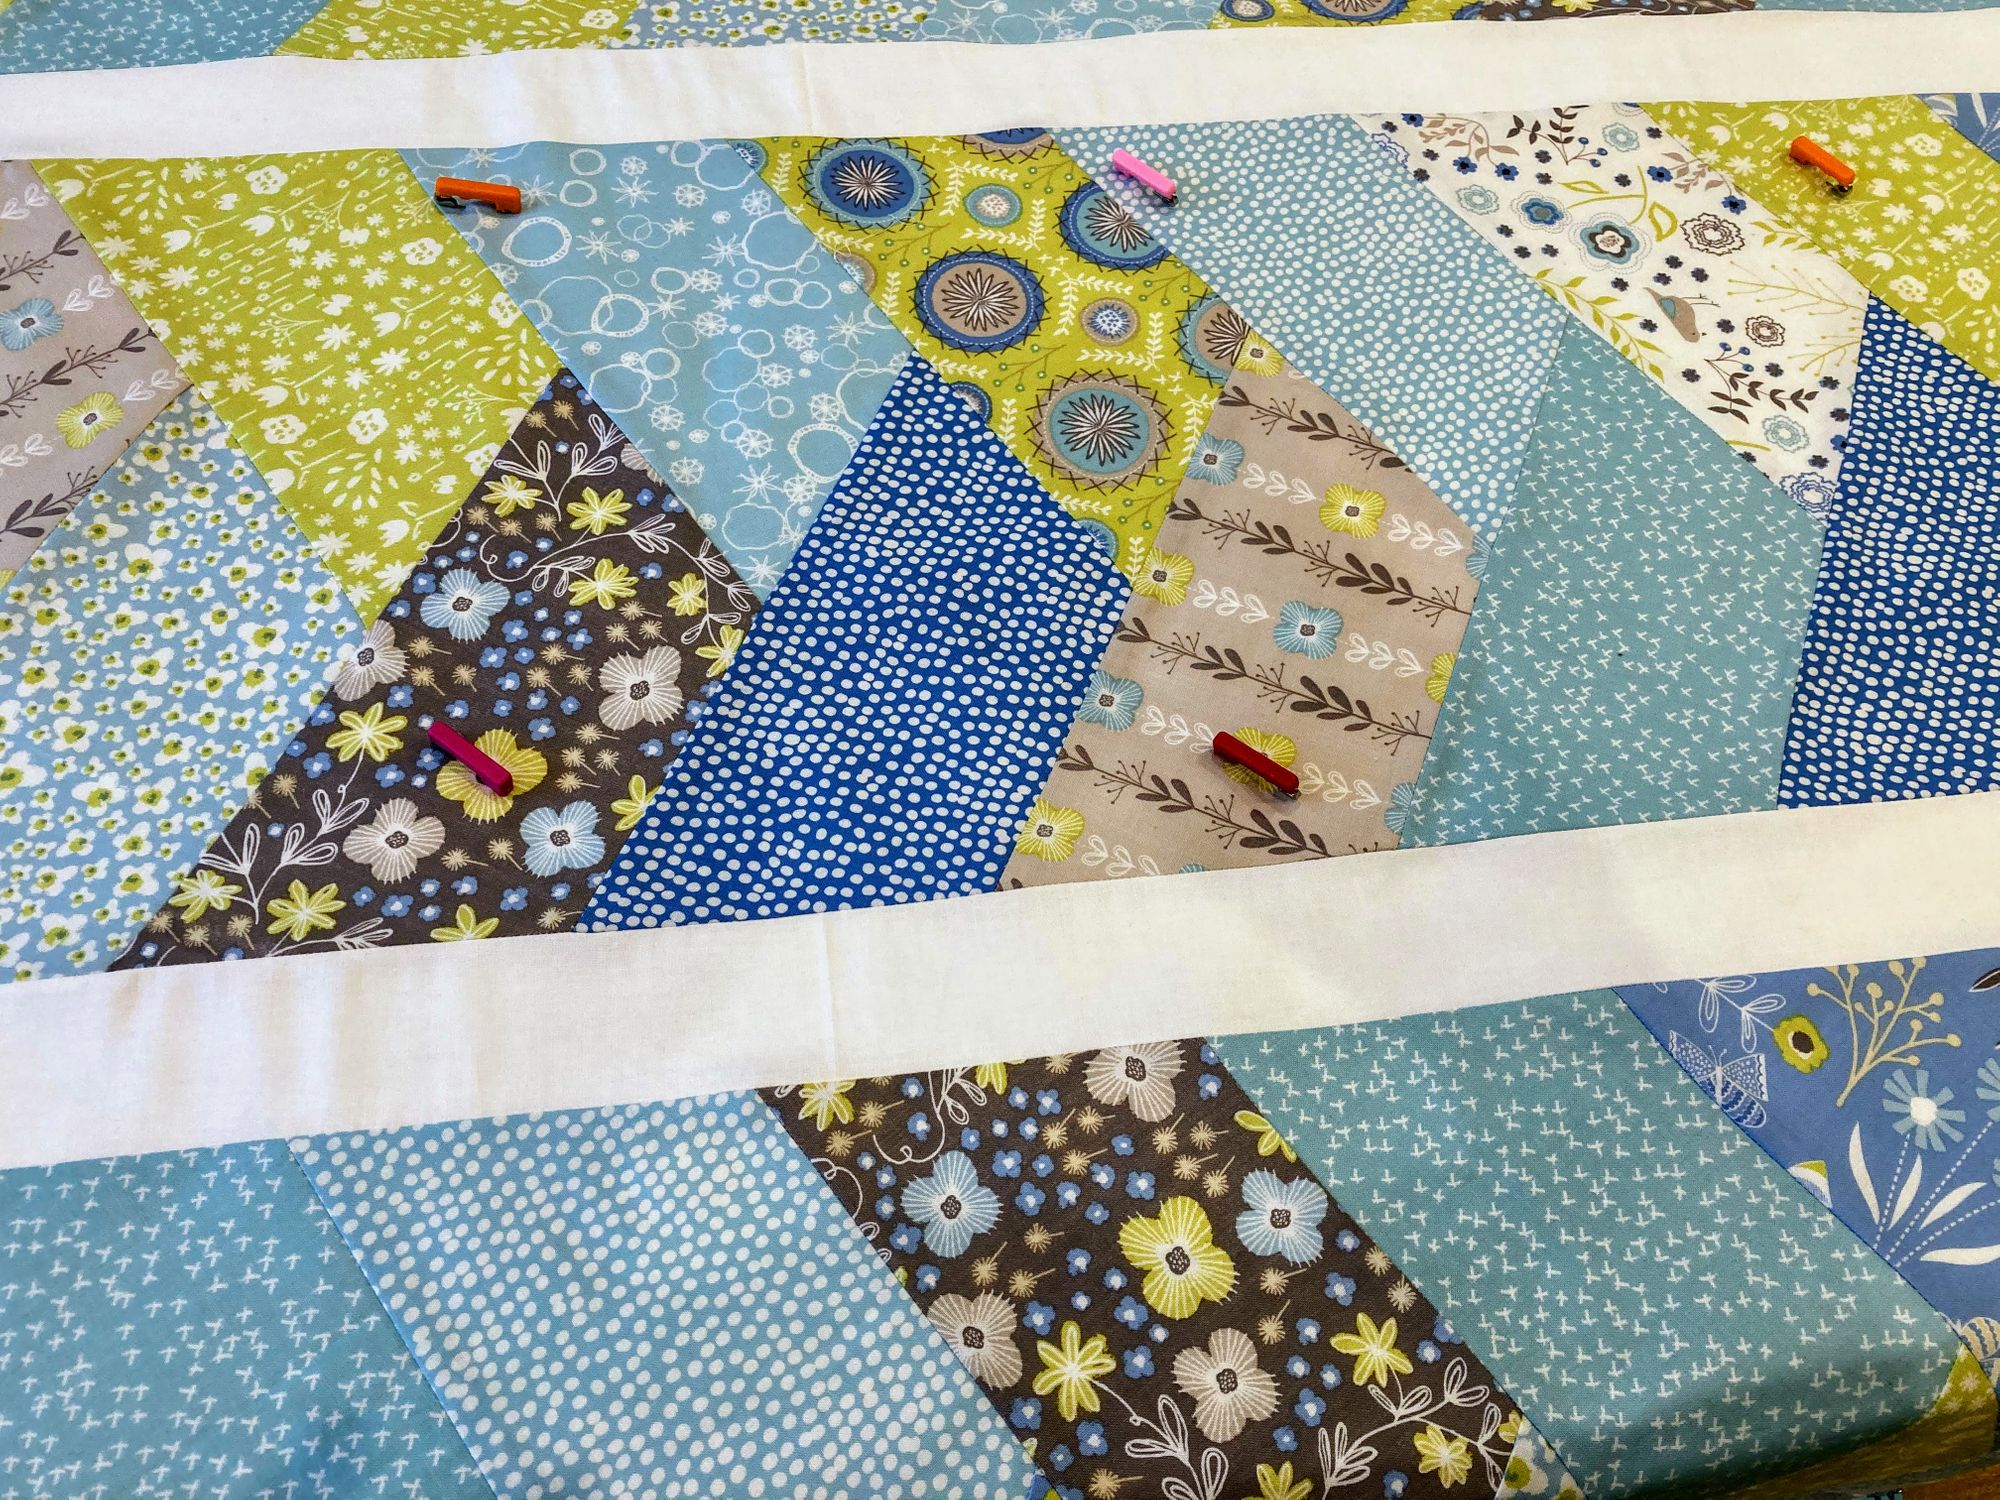 It's finally February, and I'm on a quilting roll...